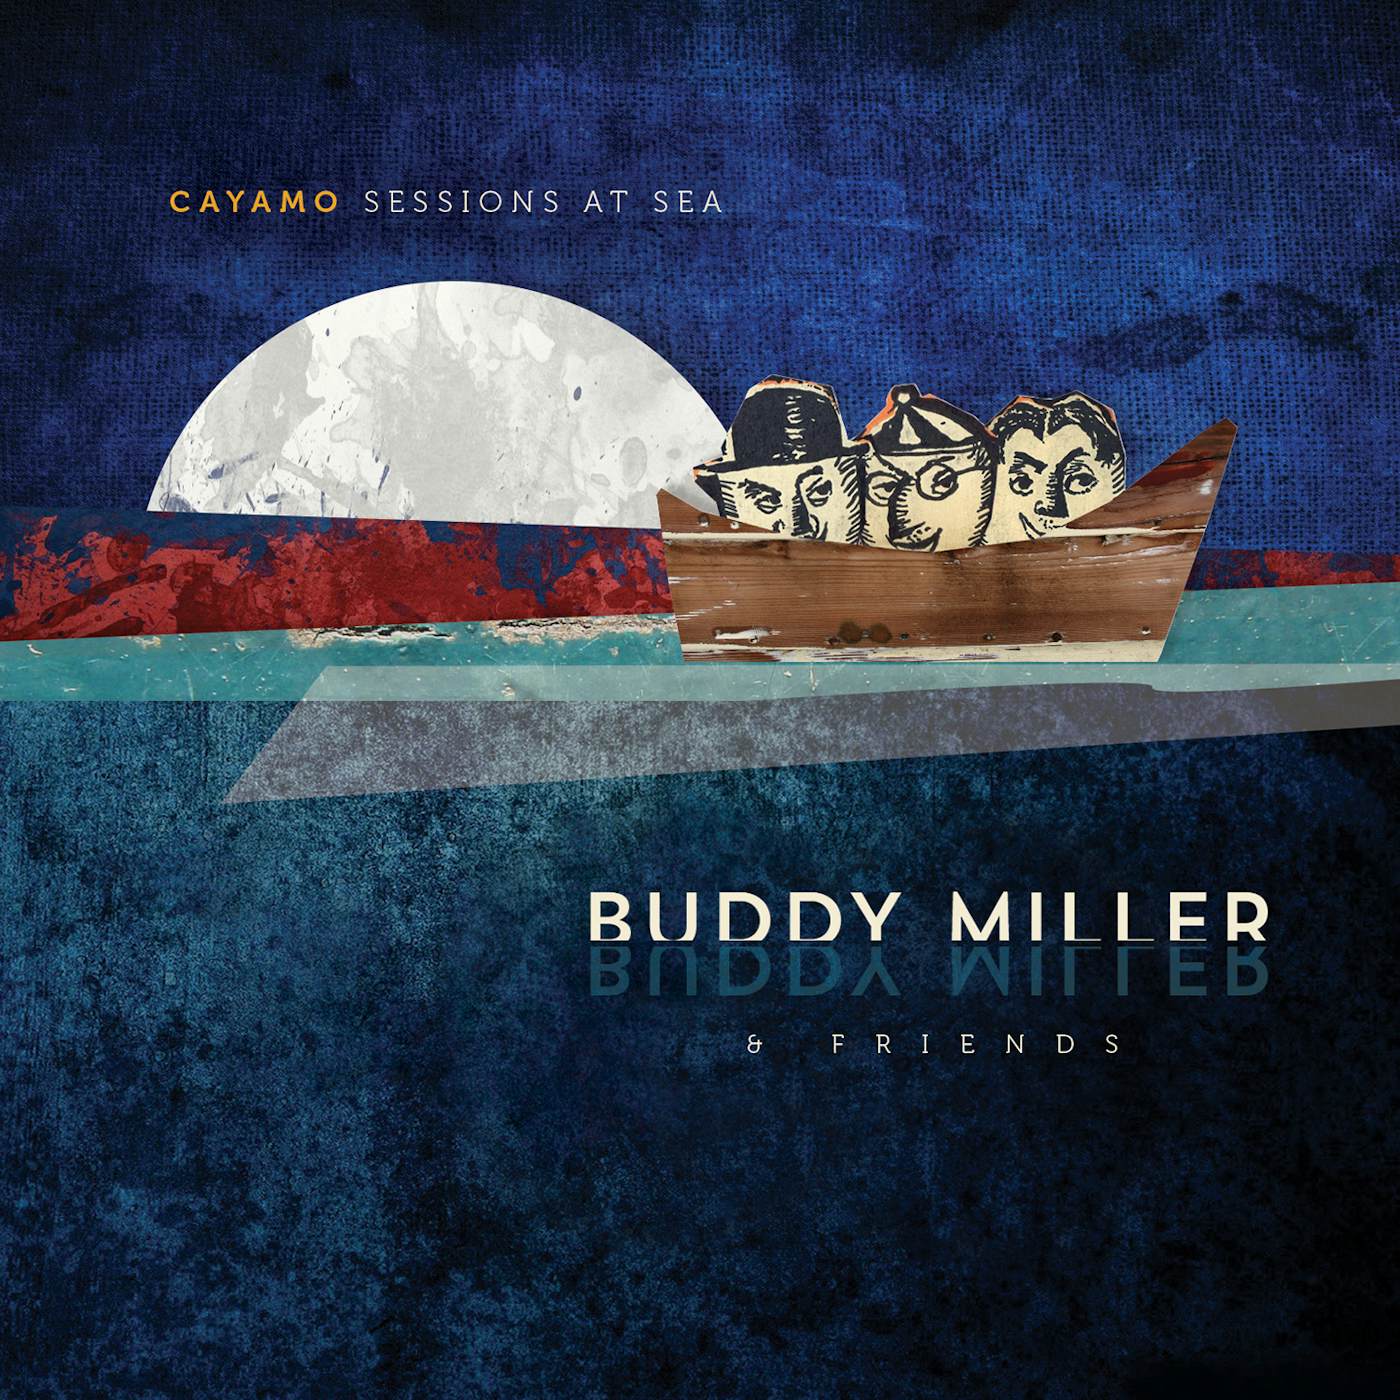 Buddy Miller CAYAMO SESSIONS AT SEA CD